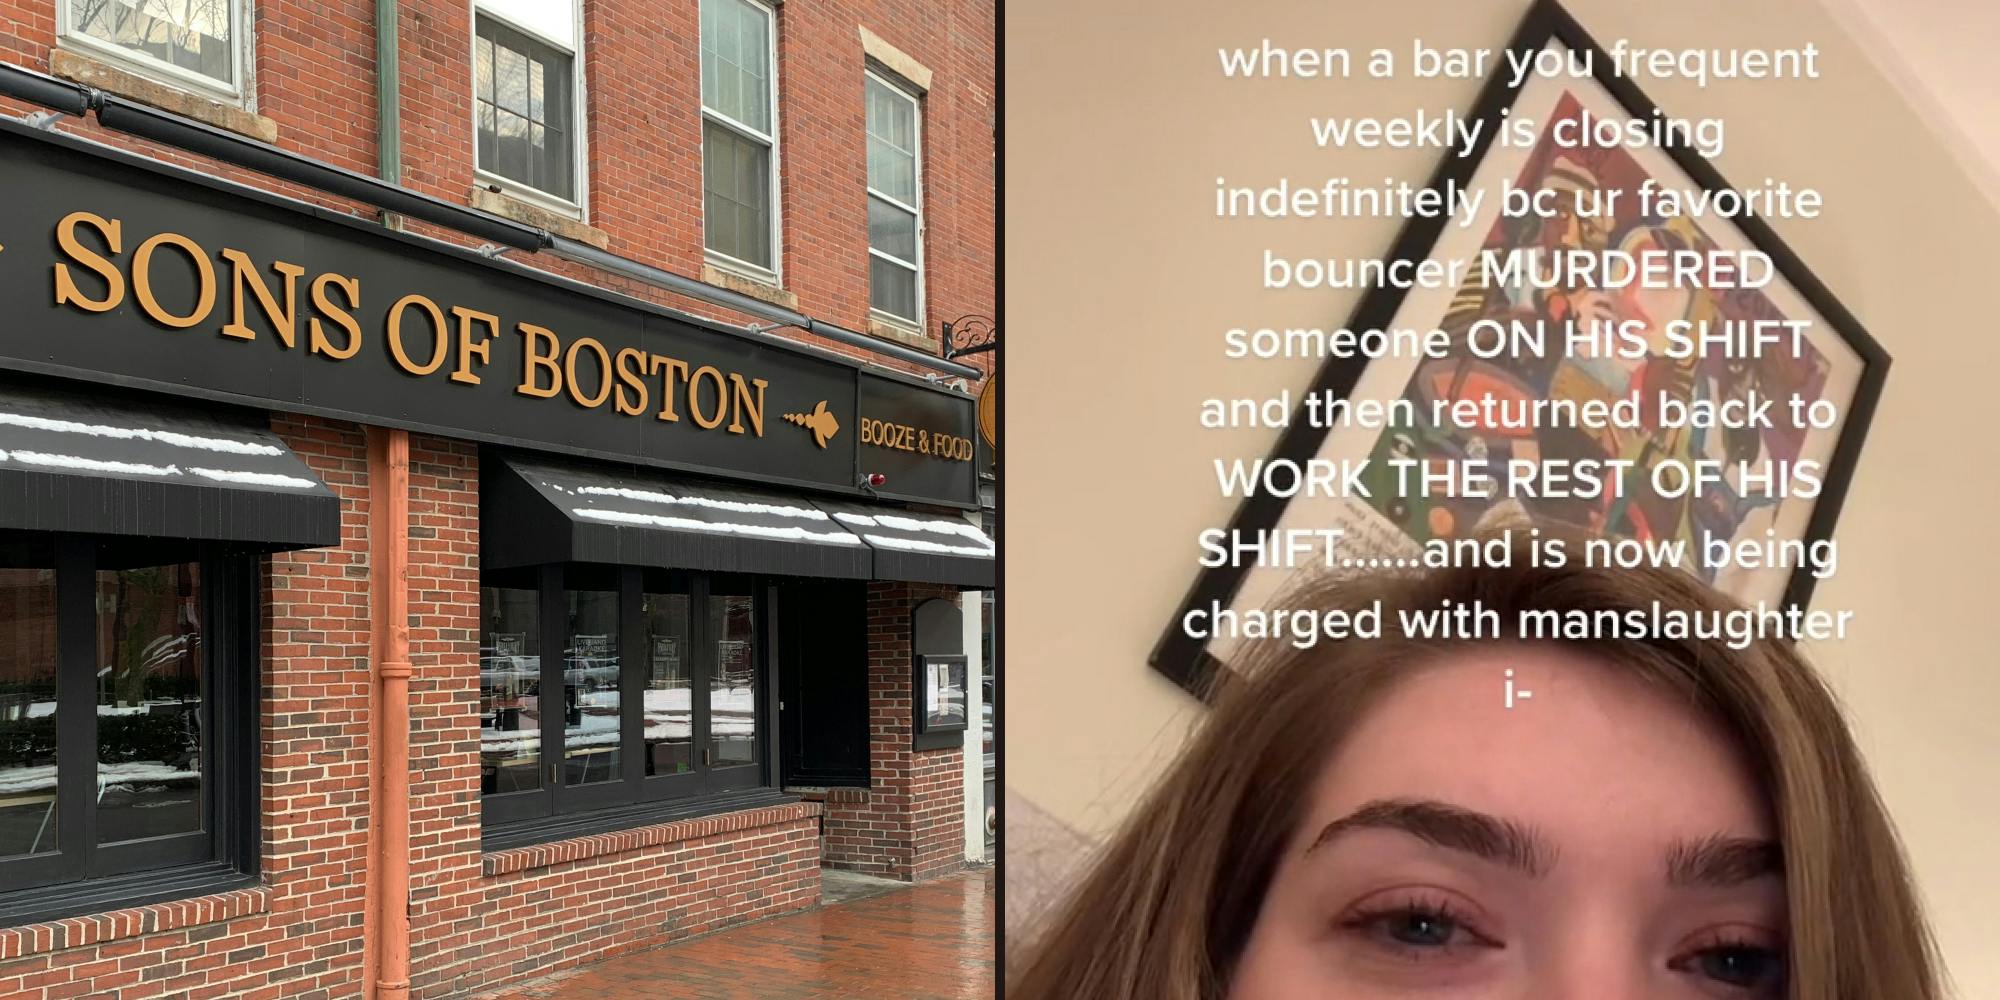 Sons of Boston Booze and Food building with sign (l) Woman eyes caption "when a bar you frequent weekly is closing bc ur favorite bouncer MURDERED someone ON HIS SHIFT and then returned back too WROK THE REST OF HIS SHIFT... and is now being charged with manslaughter i-" (r)